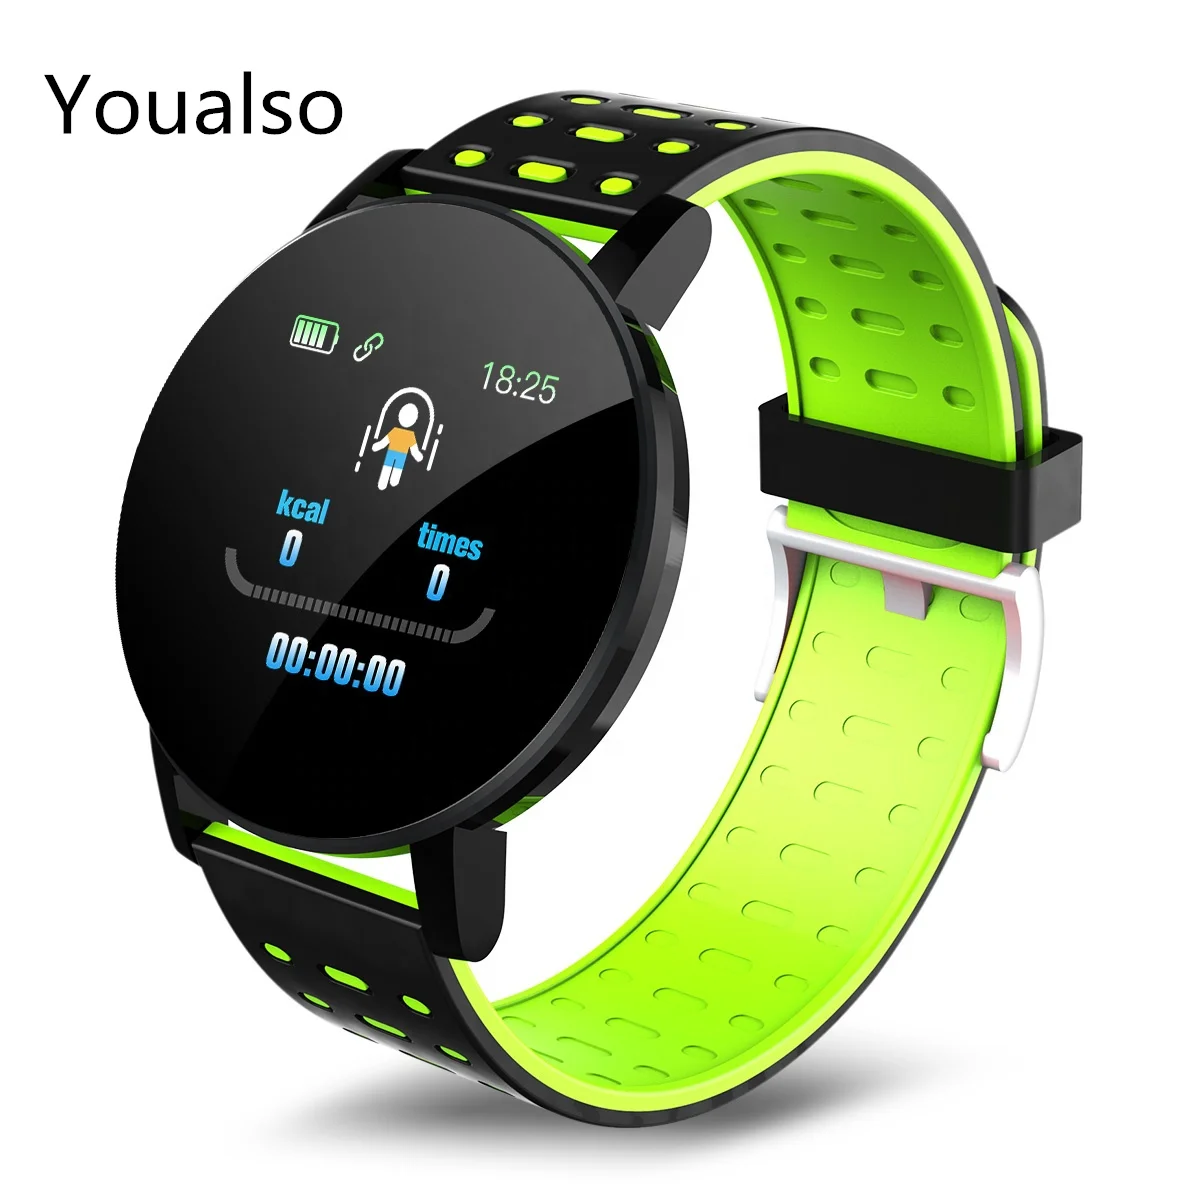 

119Plus Smart Watch Waterproof Fitness Tracker Heart Rate monitor Smart Bracelet Wristband Sports Smartwatch For Android IOS, Black